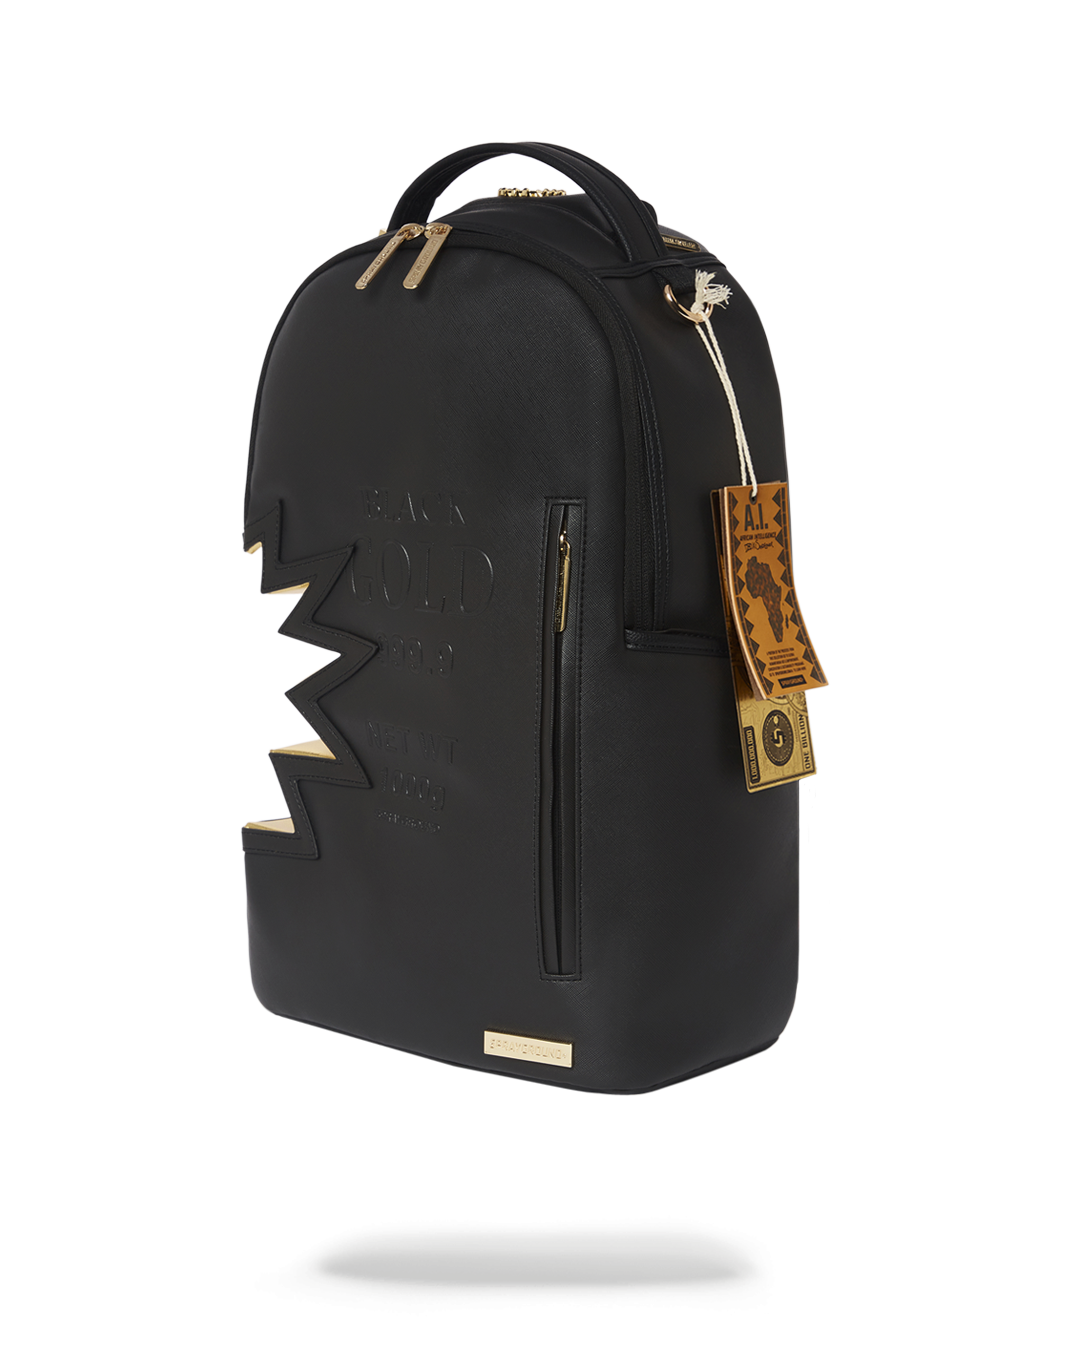 Backpacks Sprayground - Too Many Carats backpack in black and grey -  910B2990NSZ